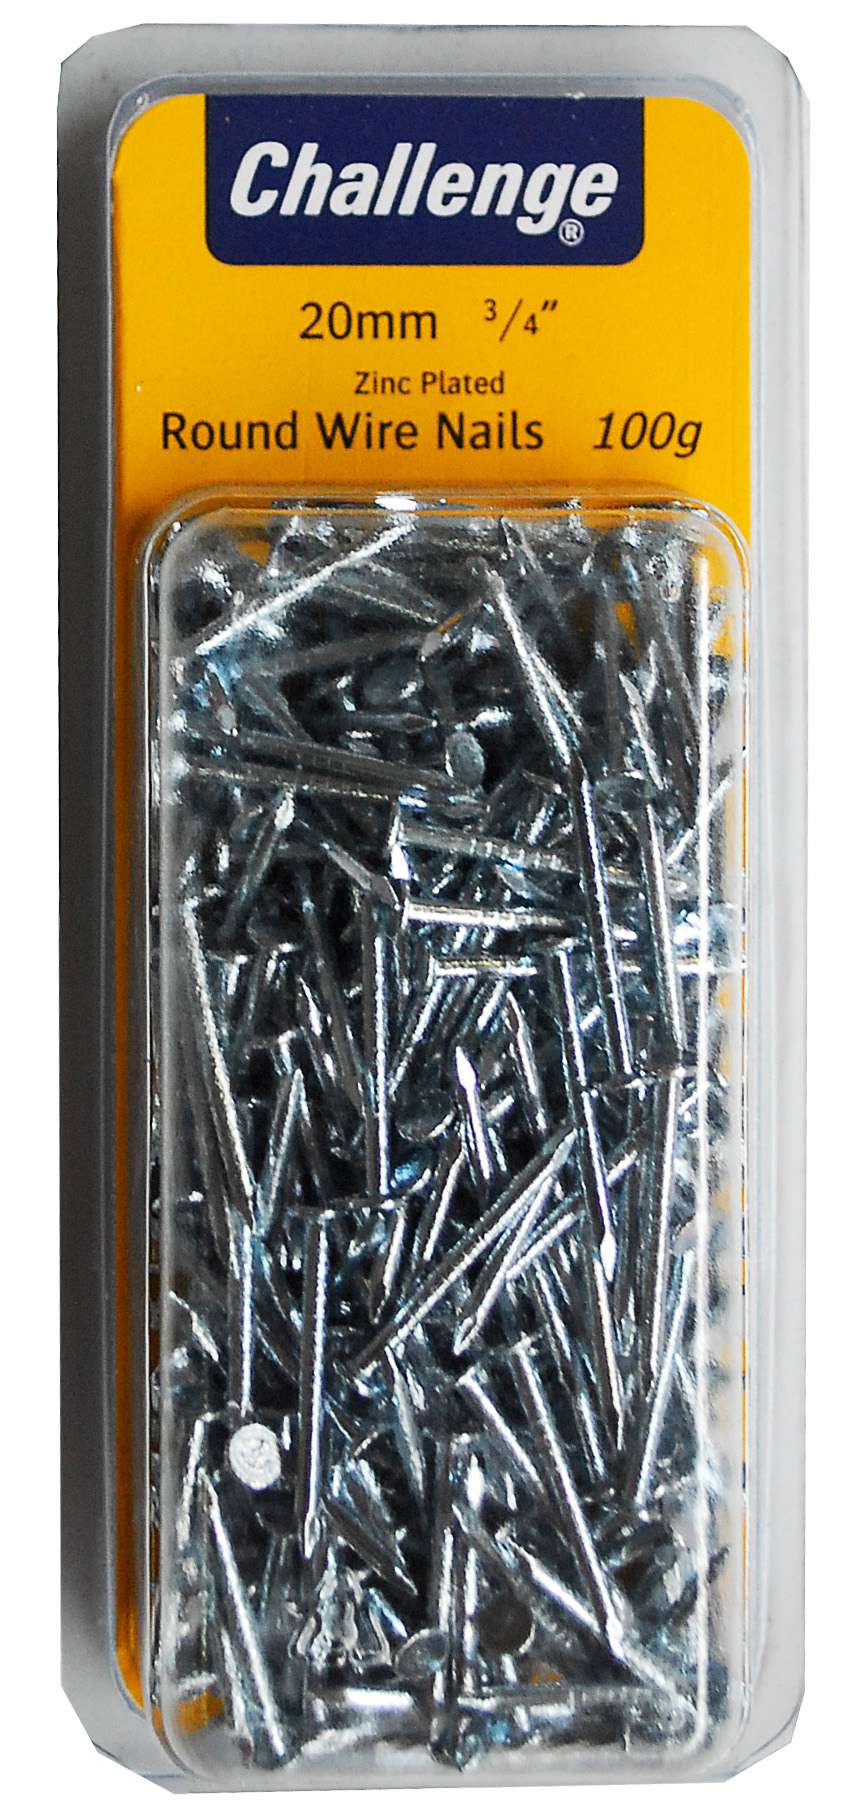 Flathead Wire Nails ZP - 100gm Blister Pack 20mm Challenge